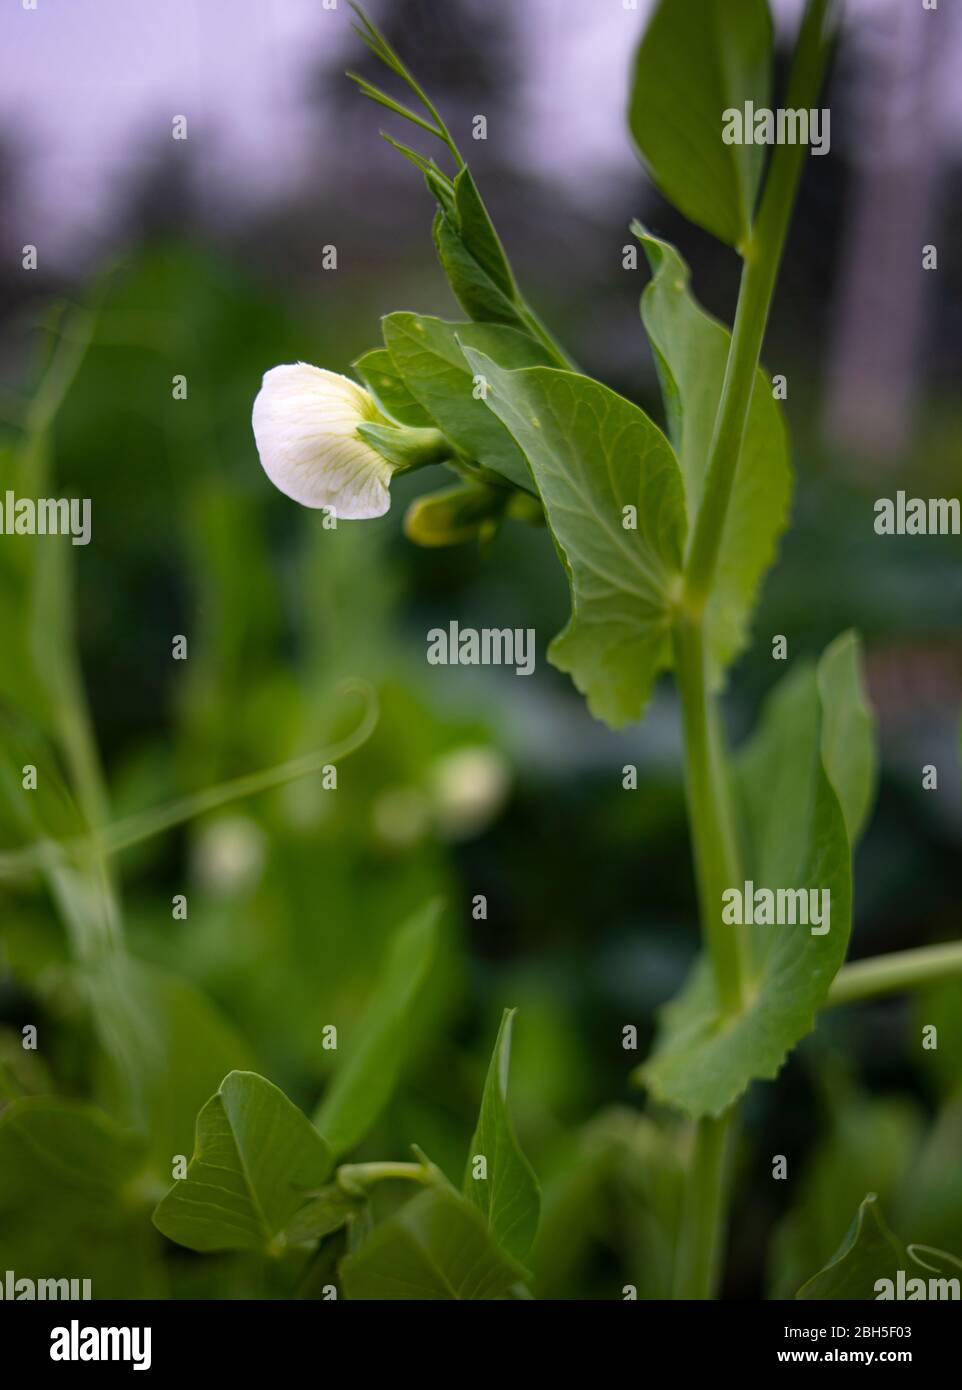 White pea flower on pea plant growing in a summer garden Stock Photo